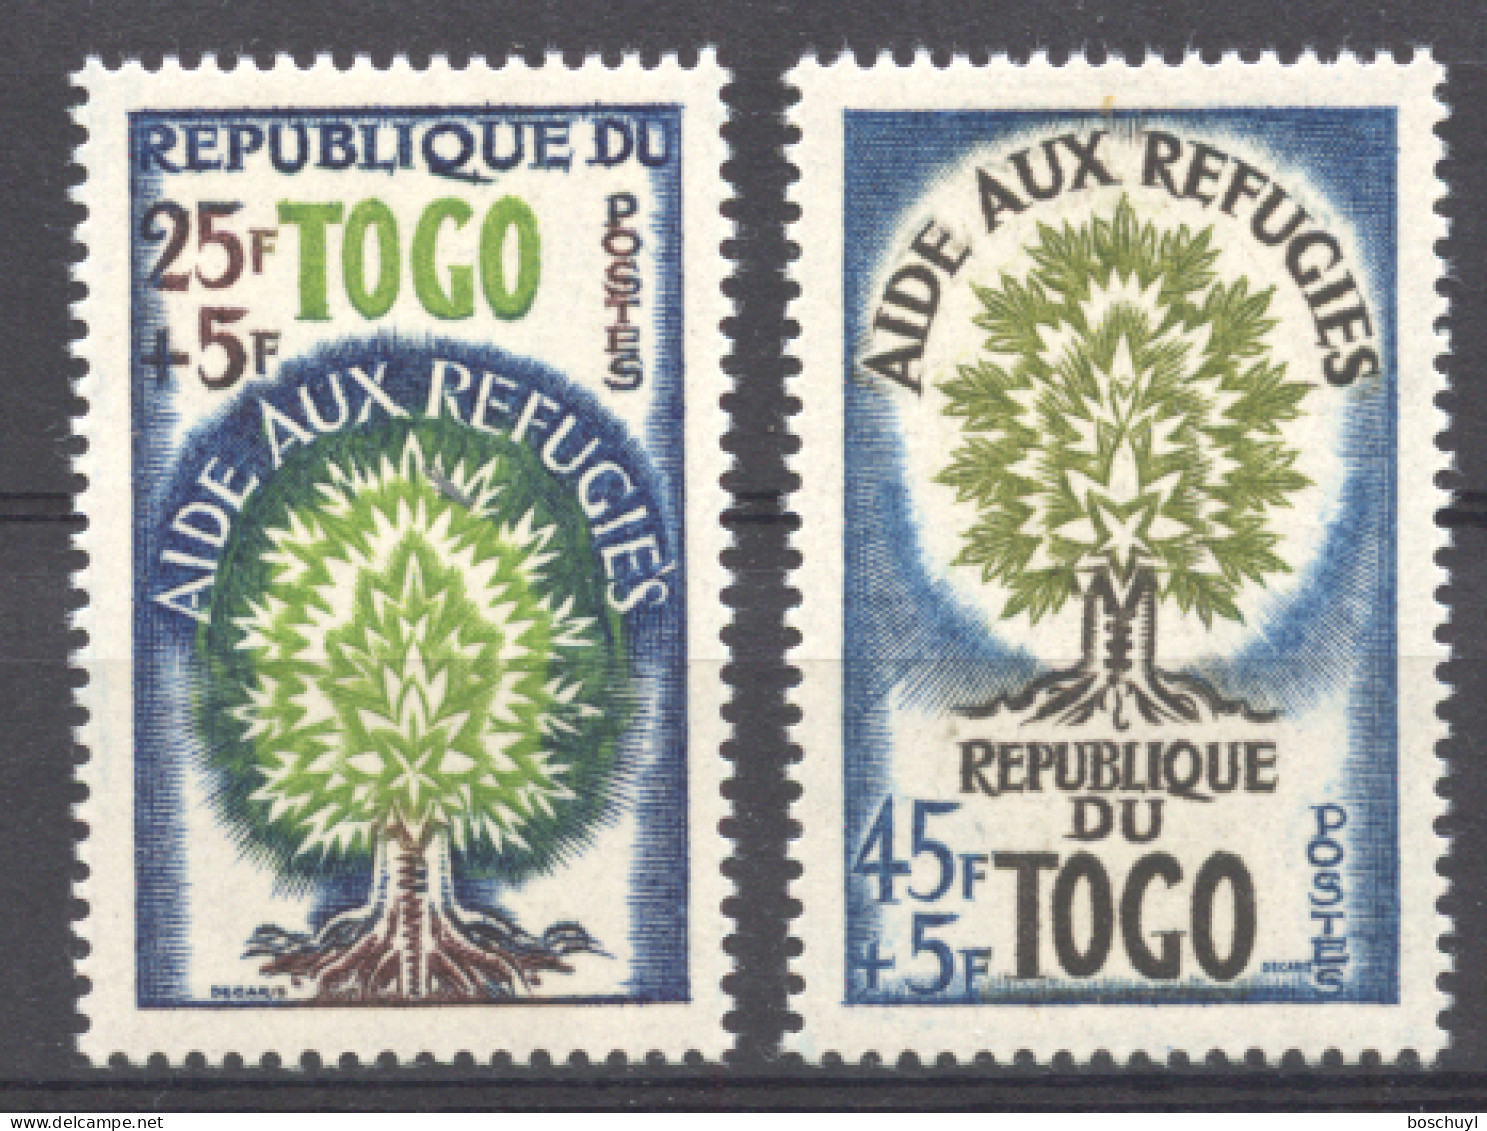 Togo, 1960, World Refugee Year, WRY, United Nations, MNH, Michel 283-284 - Réfugiés